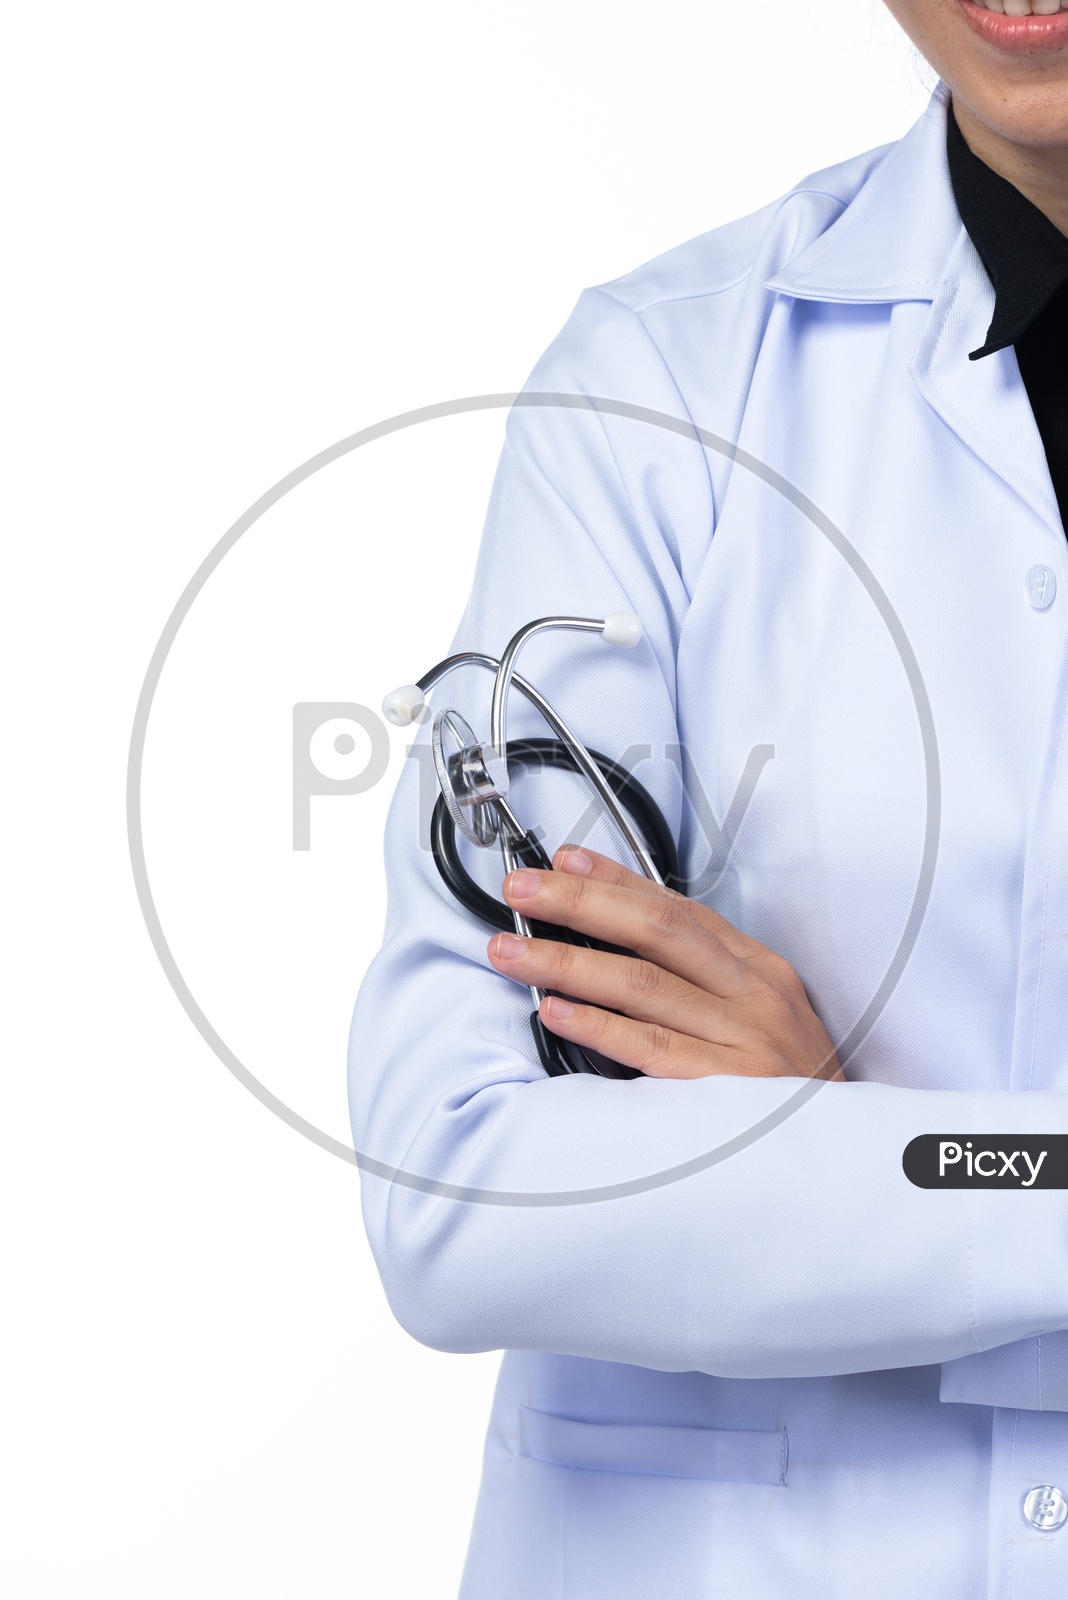 Medicine Student Or Young Doctor Holding Stethoscope in hands Over Isolated White Background